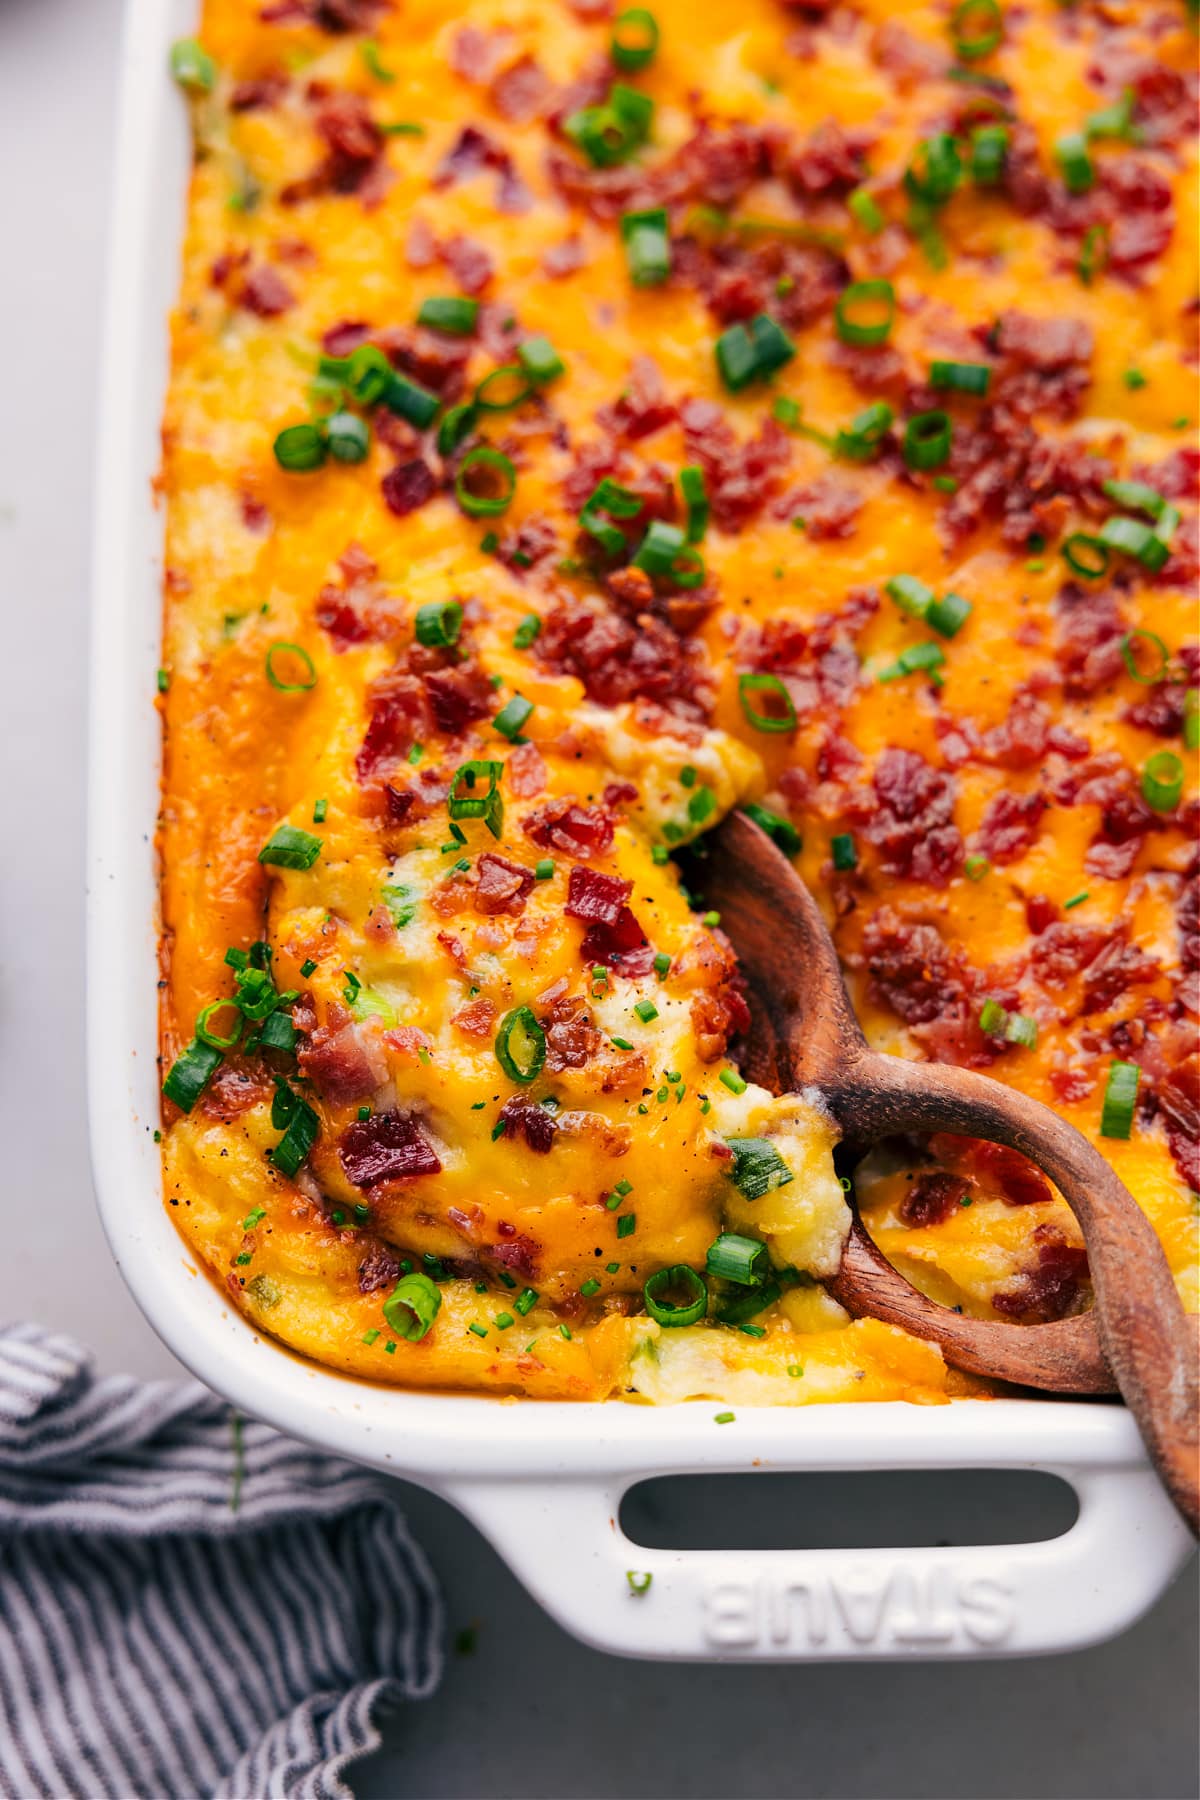 Mouthwatering Twice-Baked Potato Casserole in a casserole dish, ready to be enjoyed.